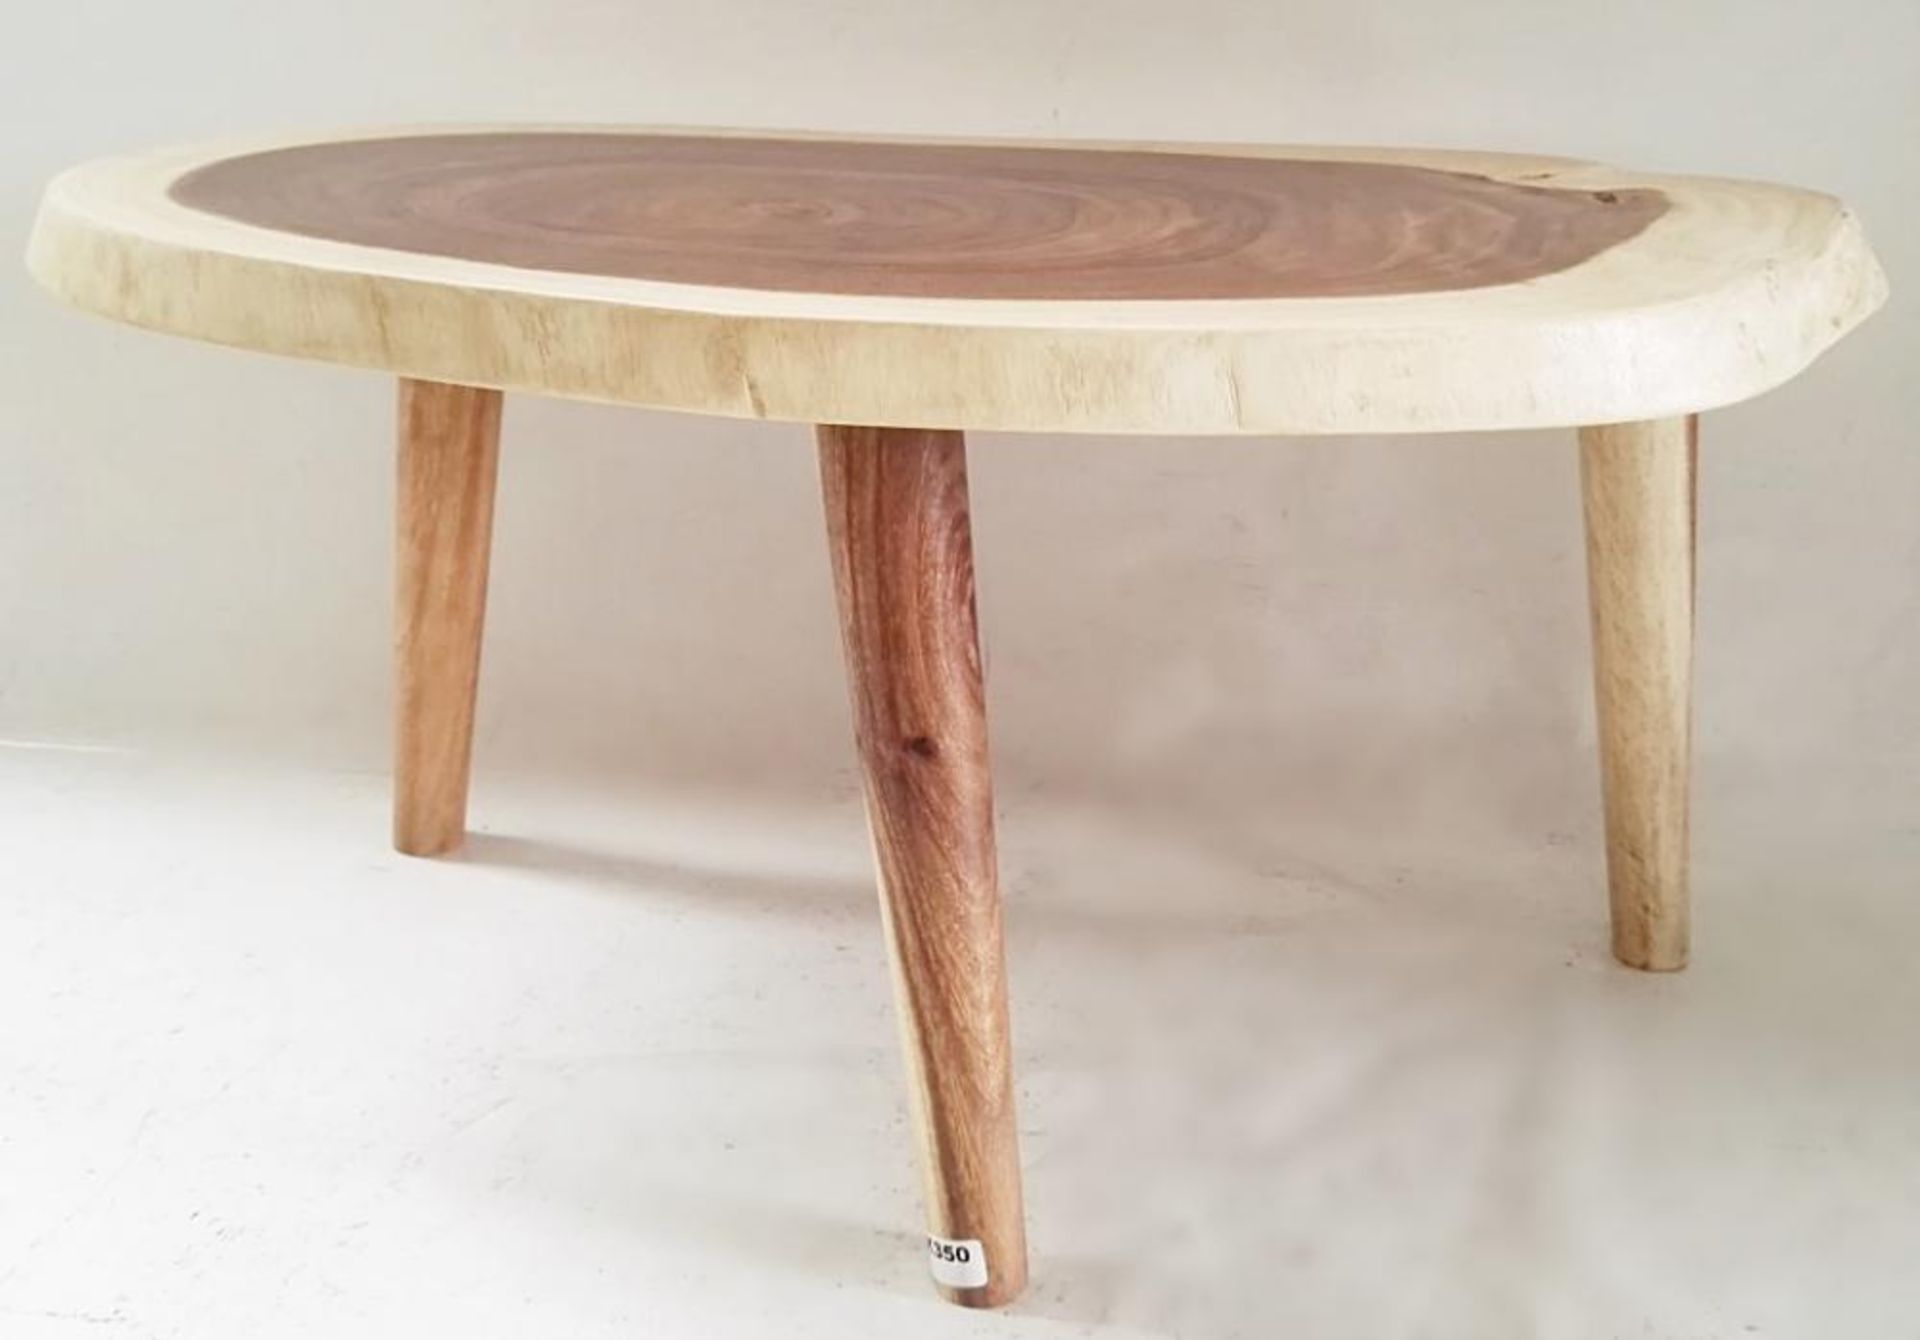 1 x Unique Three Legged Reclaimed Solid Tree Trunk Coffee Table - Dimensions (approx): W90 x D56cm, - Image 2 of 5